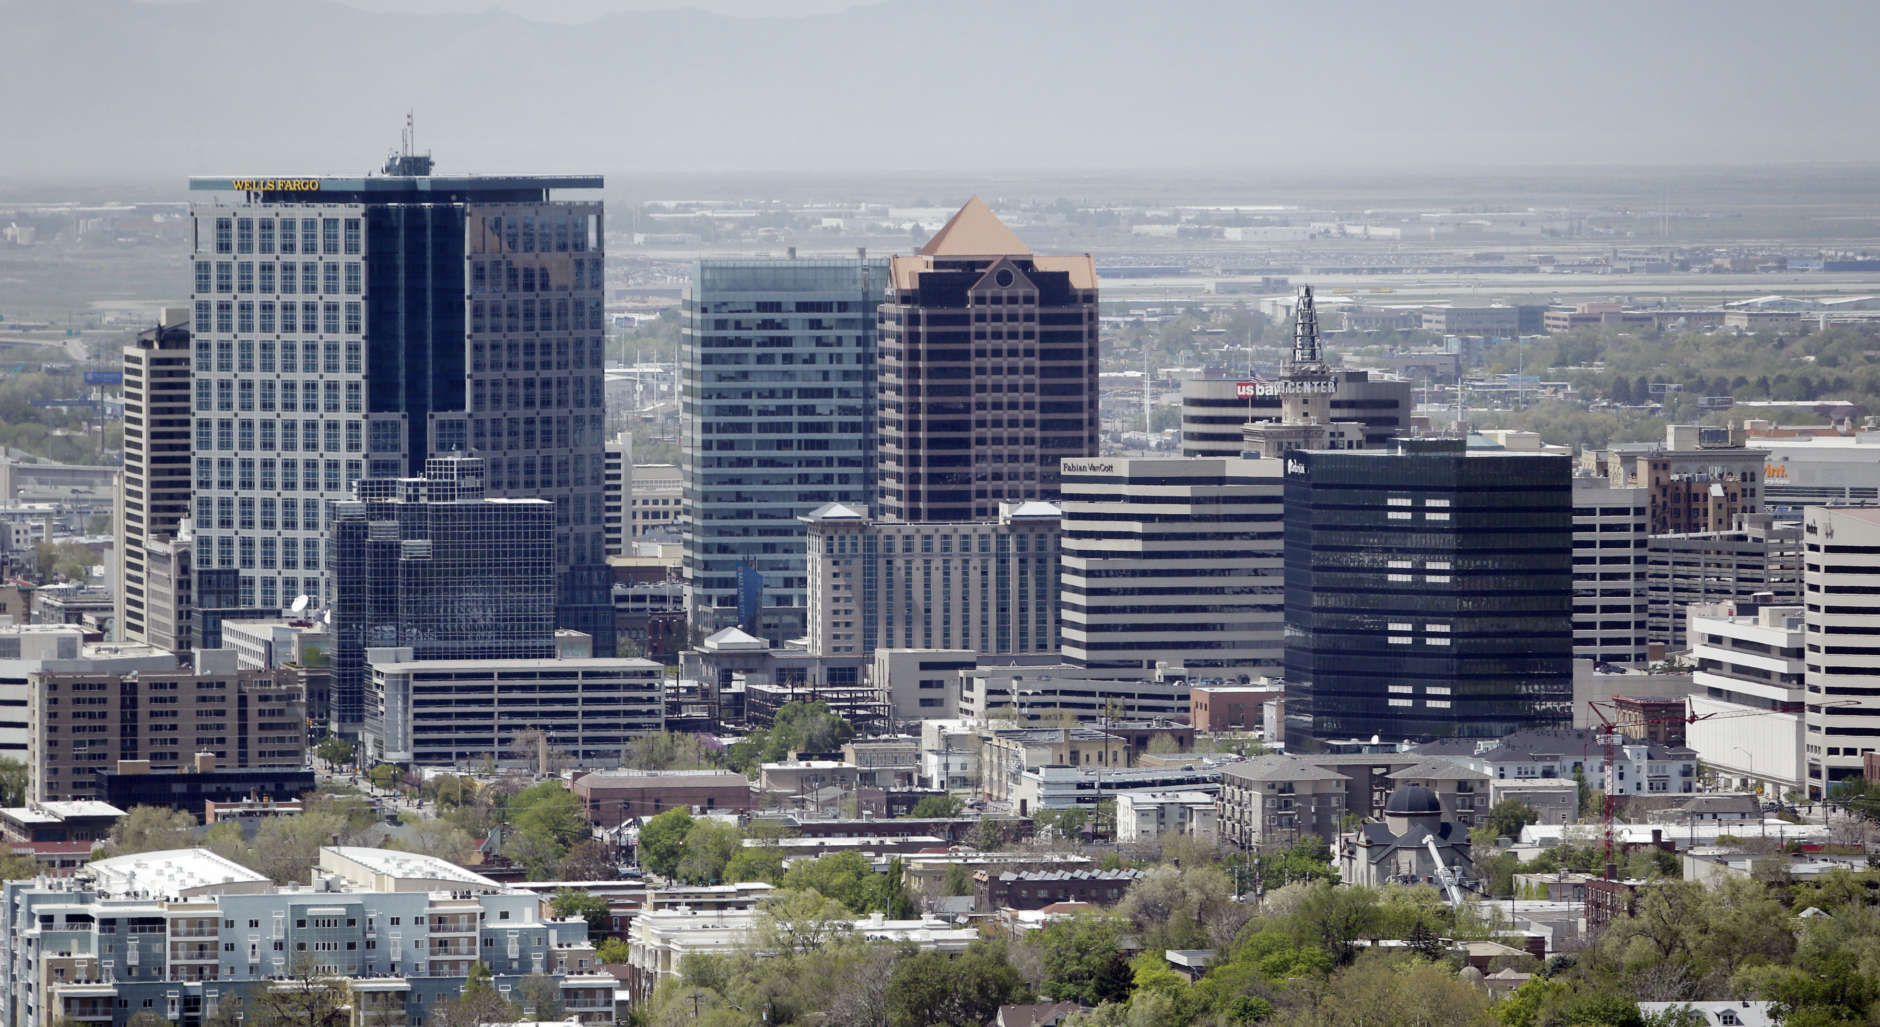 This Friday, April 22, 2016, photo, shows the skyline of Salt Lake City. A new report raising the likelihood of a destructive earthquake striking Salt Lake City in the next half century has underscored the urgency to retrofit more than 30,000 older brick homes and other unreinforced buildings at high risk of collapsing. (AP Photo/Rick Bowmer)